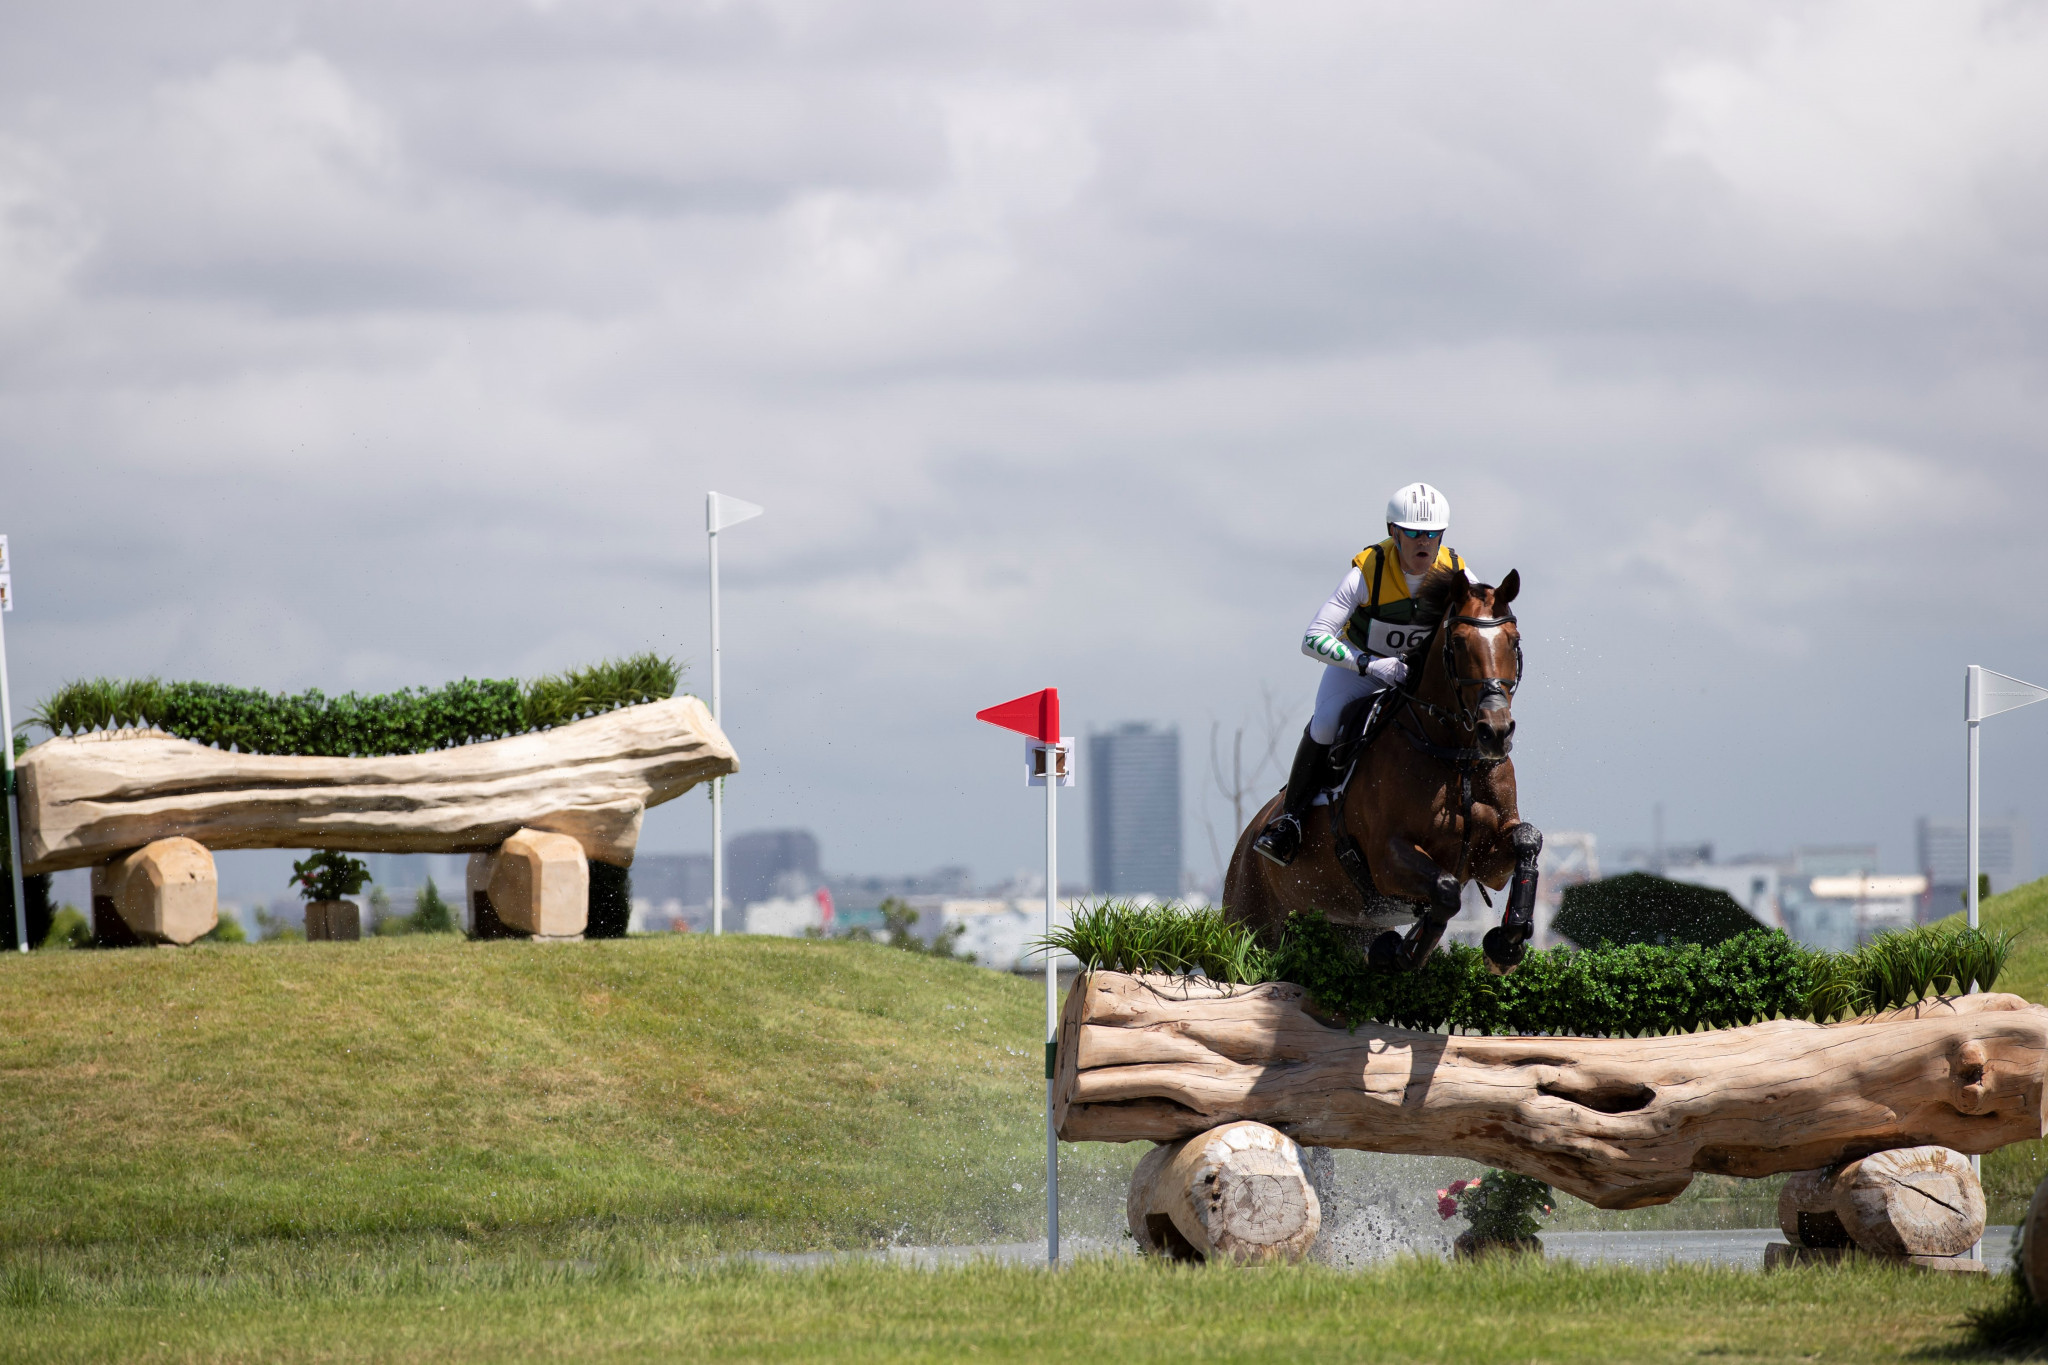 Triple Olympic gold medallist Hoy takes lead after cross-country phase of Tokyo 2020 eventing test event